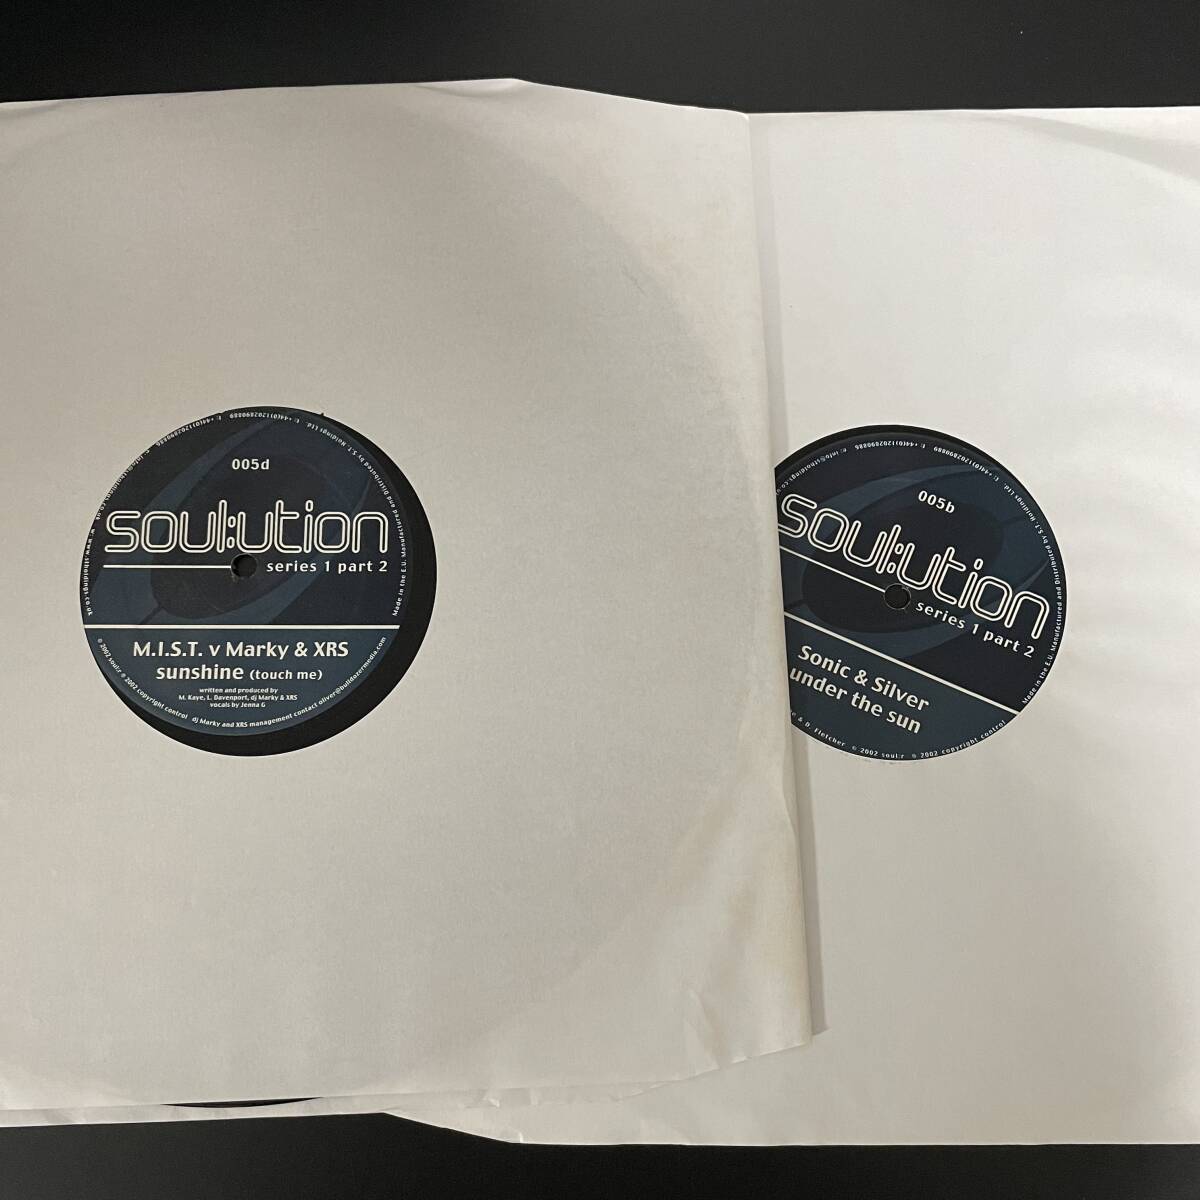 V.A. - Soul:ution Series 1 Part 2 / M.I.S.T. High Contrast, Marky, Soul:r SOULR005 ドラムンベース,Drum&Bass,Drum'n'Bass,レコードの画像2